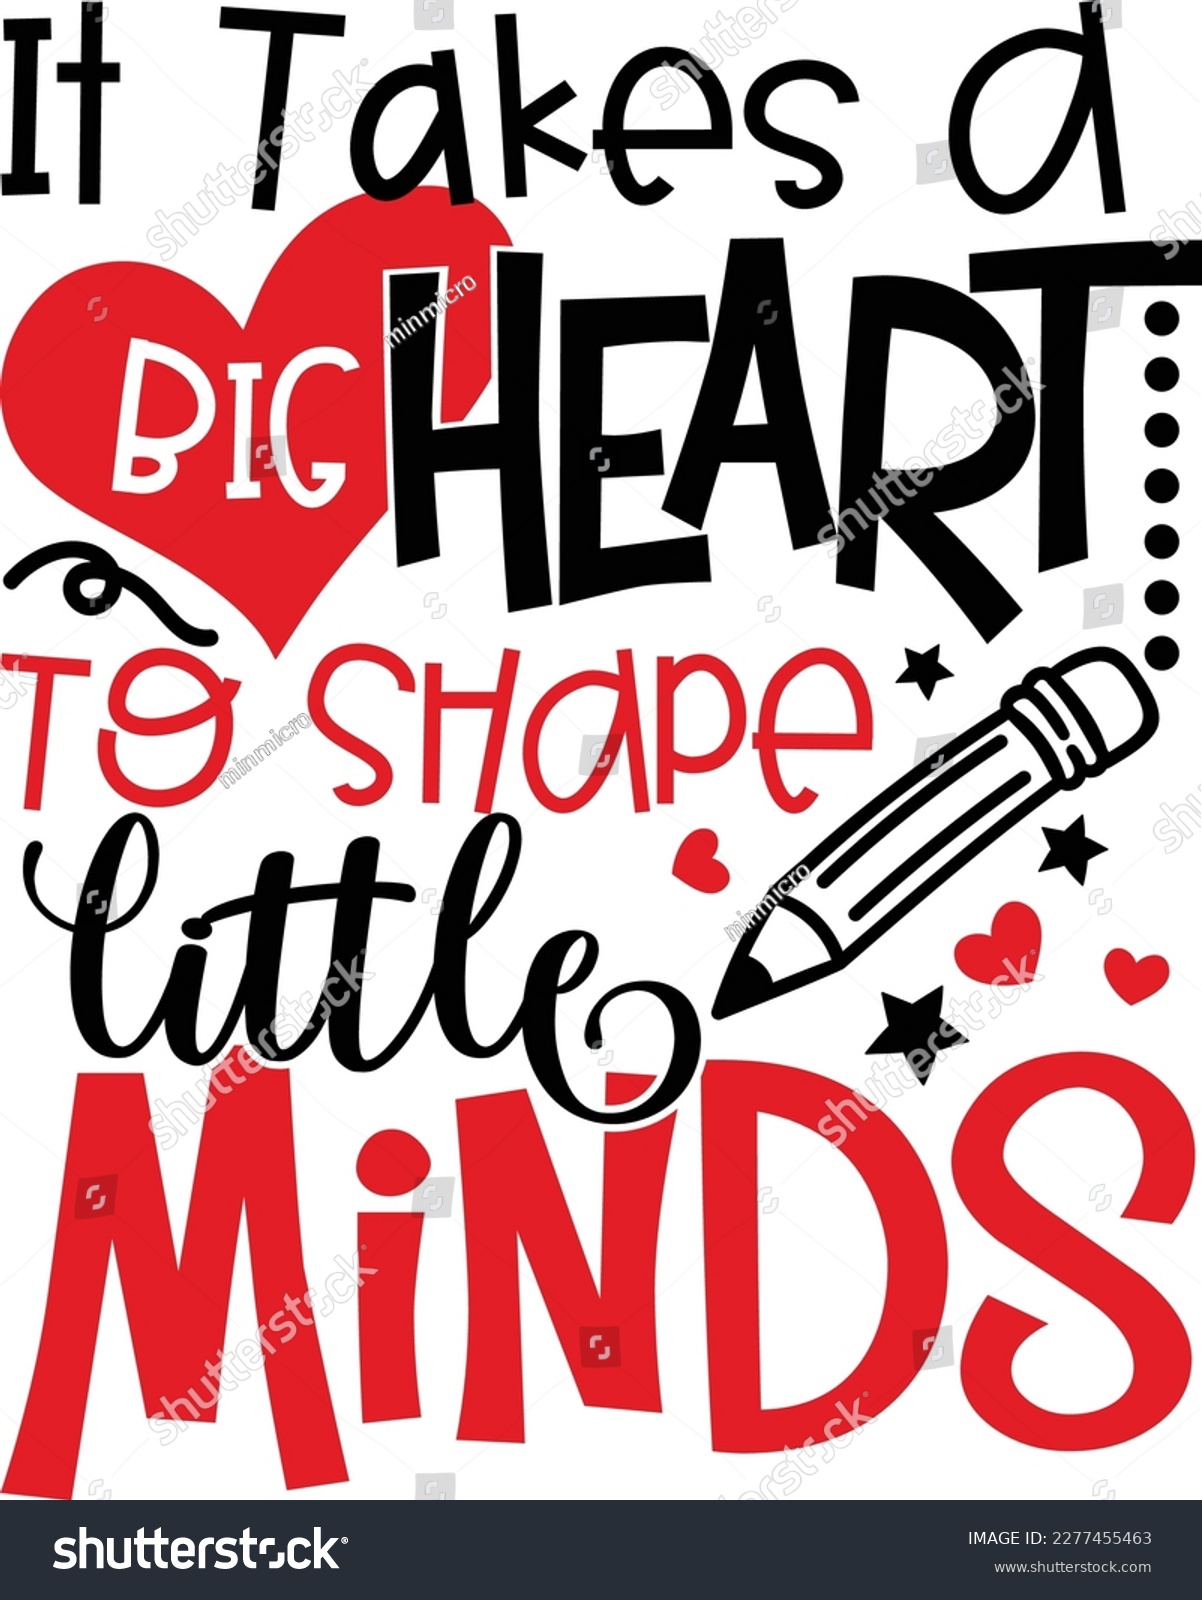 SVG of It takes a big heart to shape little minds Printable Vector Illustration, typography t-shirt graphics, typography art lettering composition design. svg